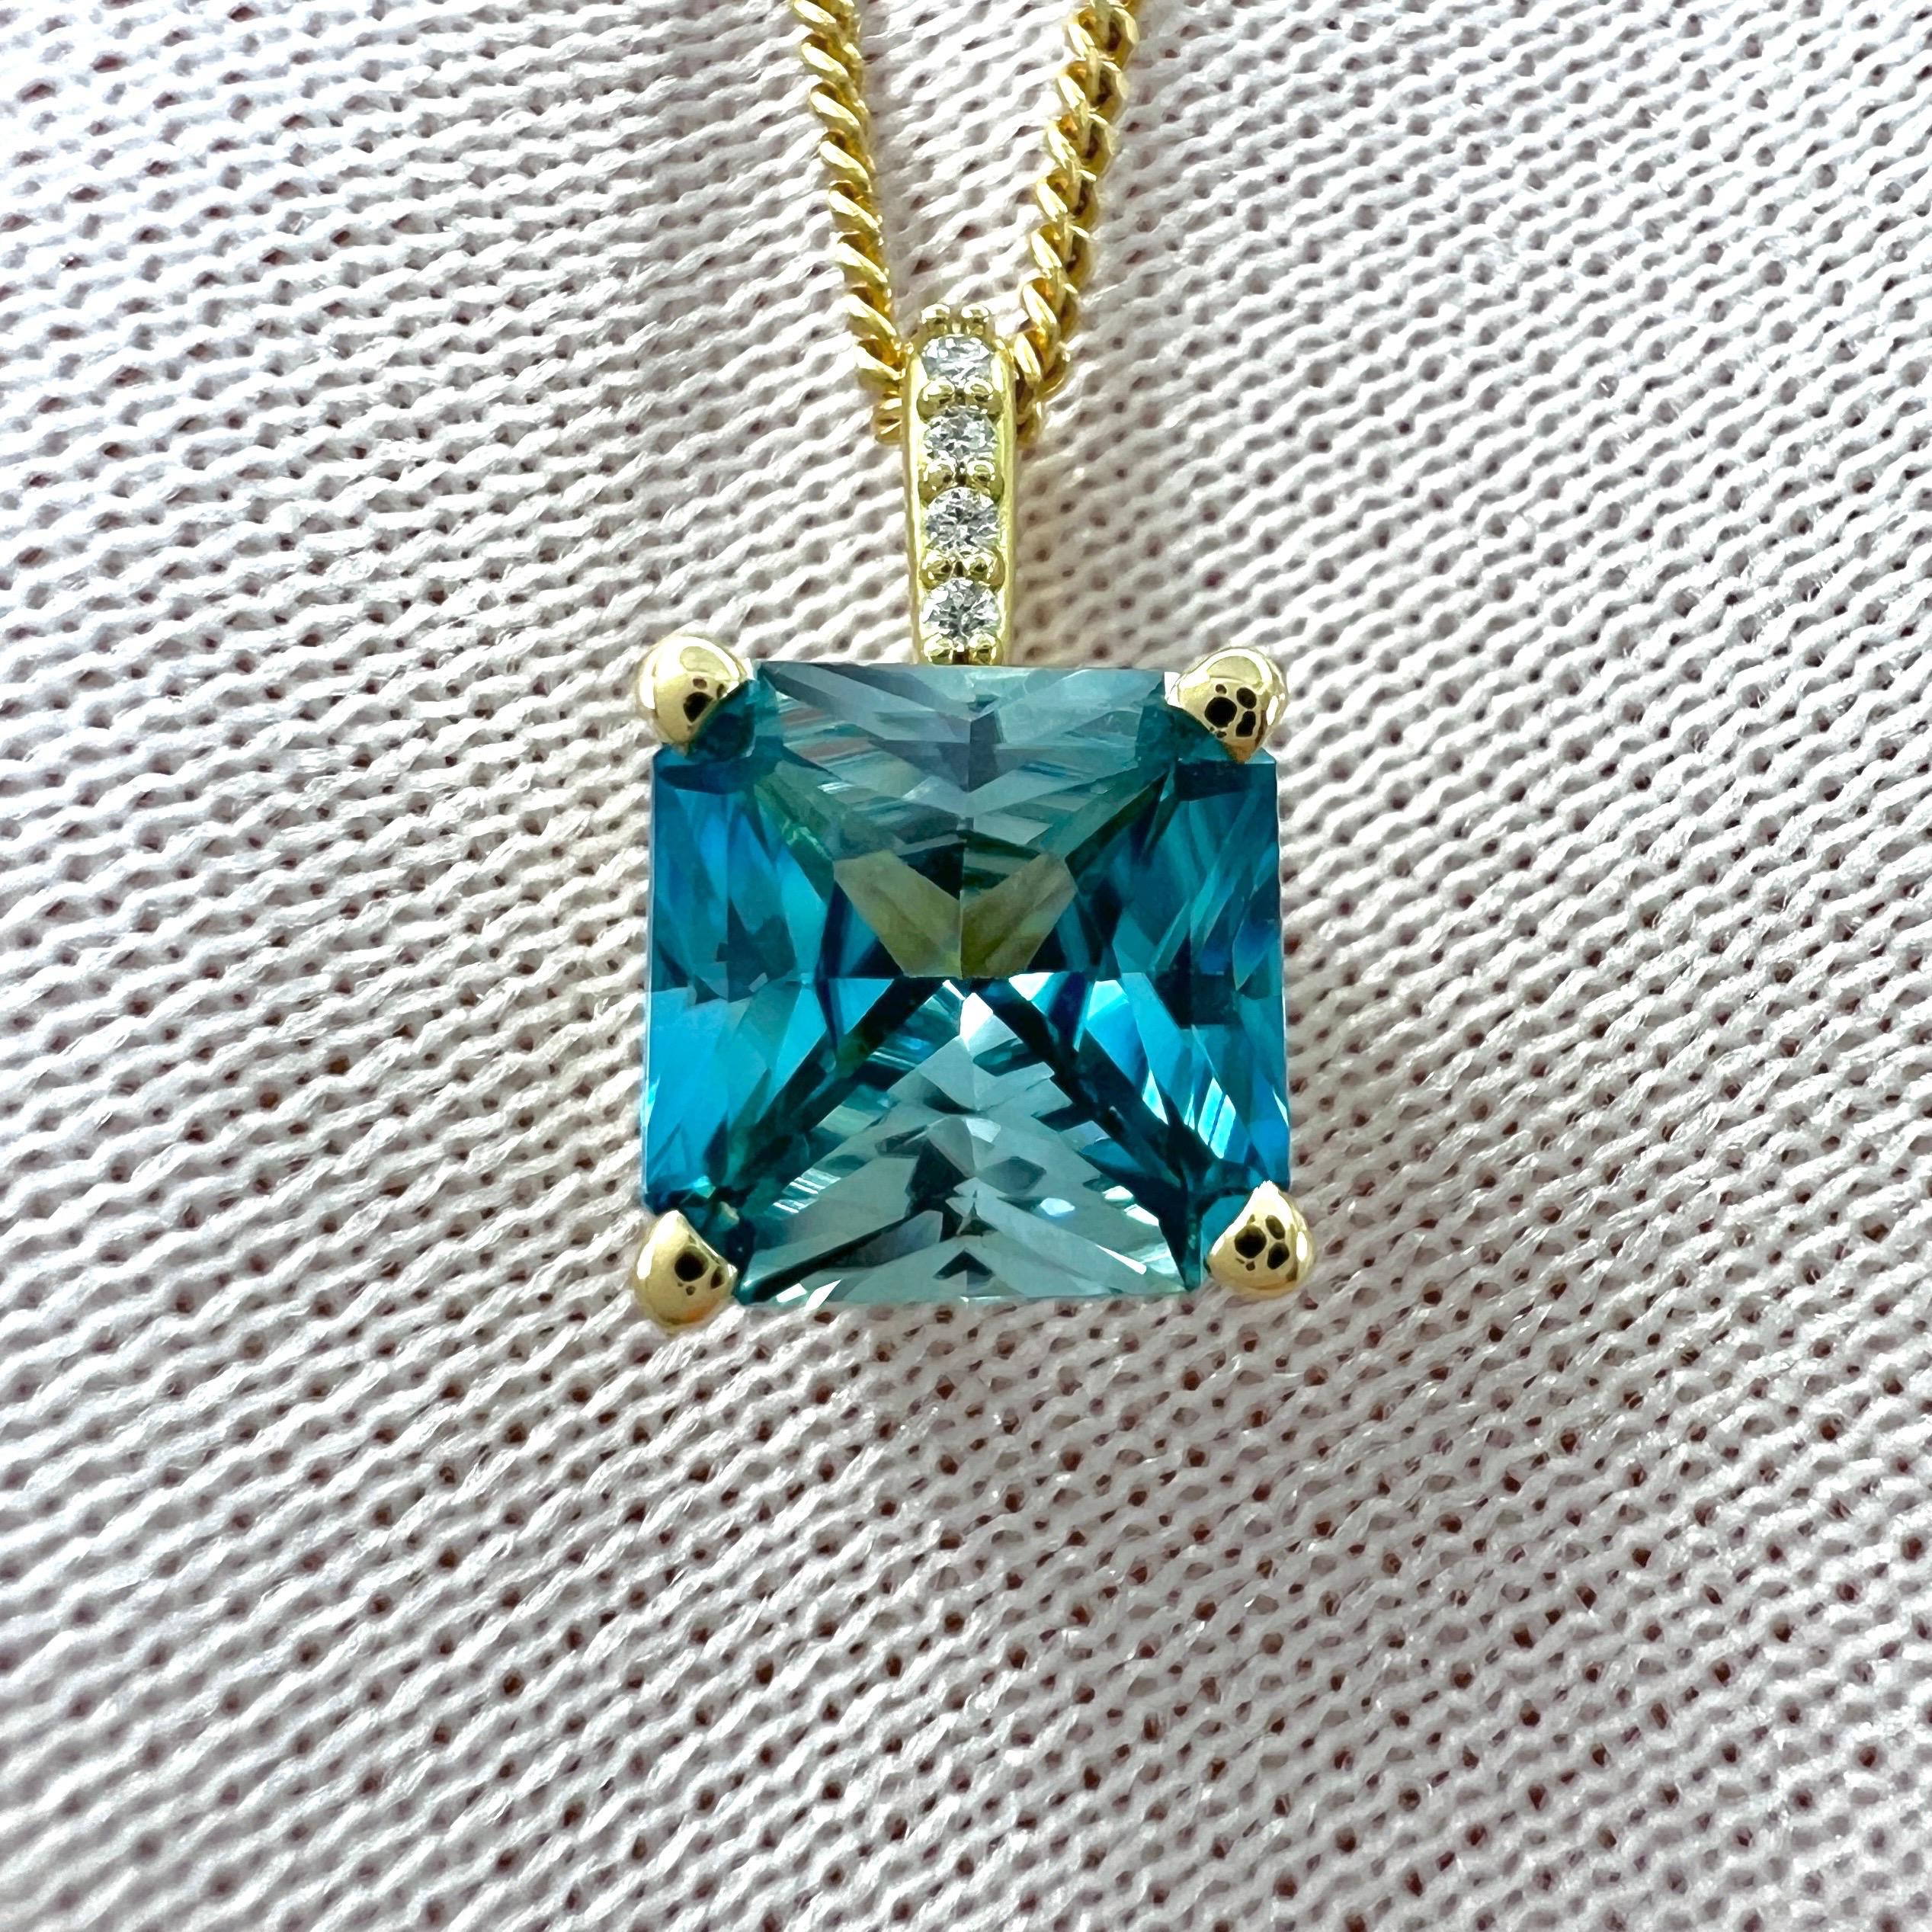 Natural Blue Zircon Fancy Radiant Cut 18k Yellow Gold Diamond Hidden Halo Pendant Necklace.

1.65 Carat natural blue zircon with a fine vivid blue colour and excellent clarity. A very clean stone, VVS. 
Also has an excellent fancy radiant cut.